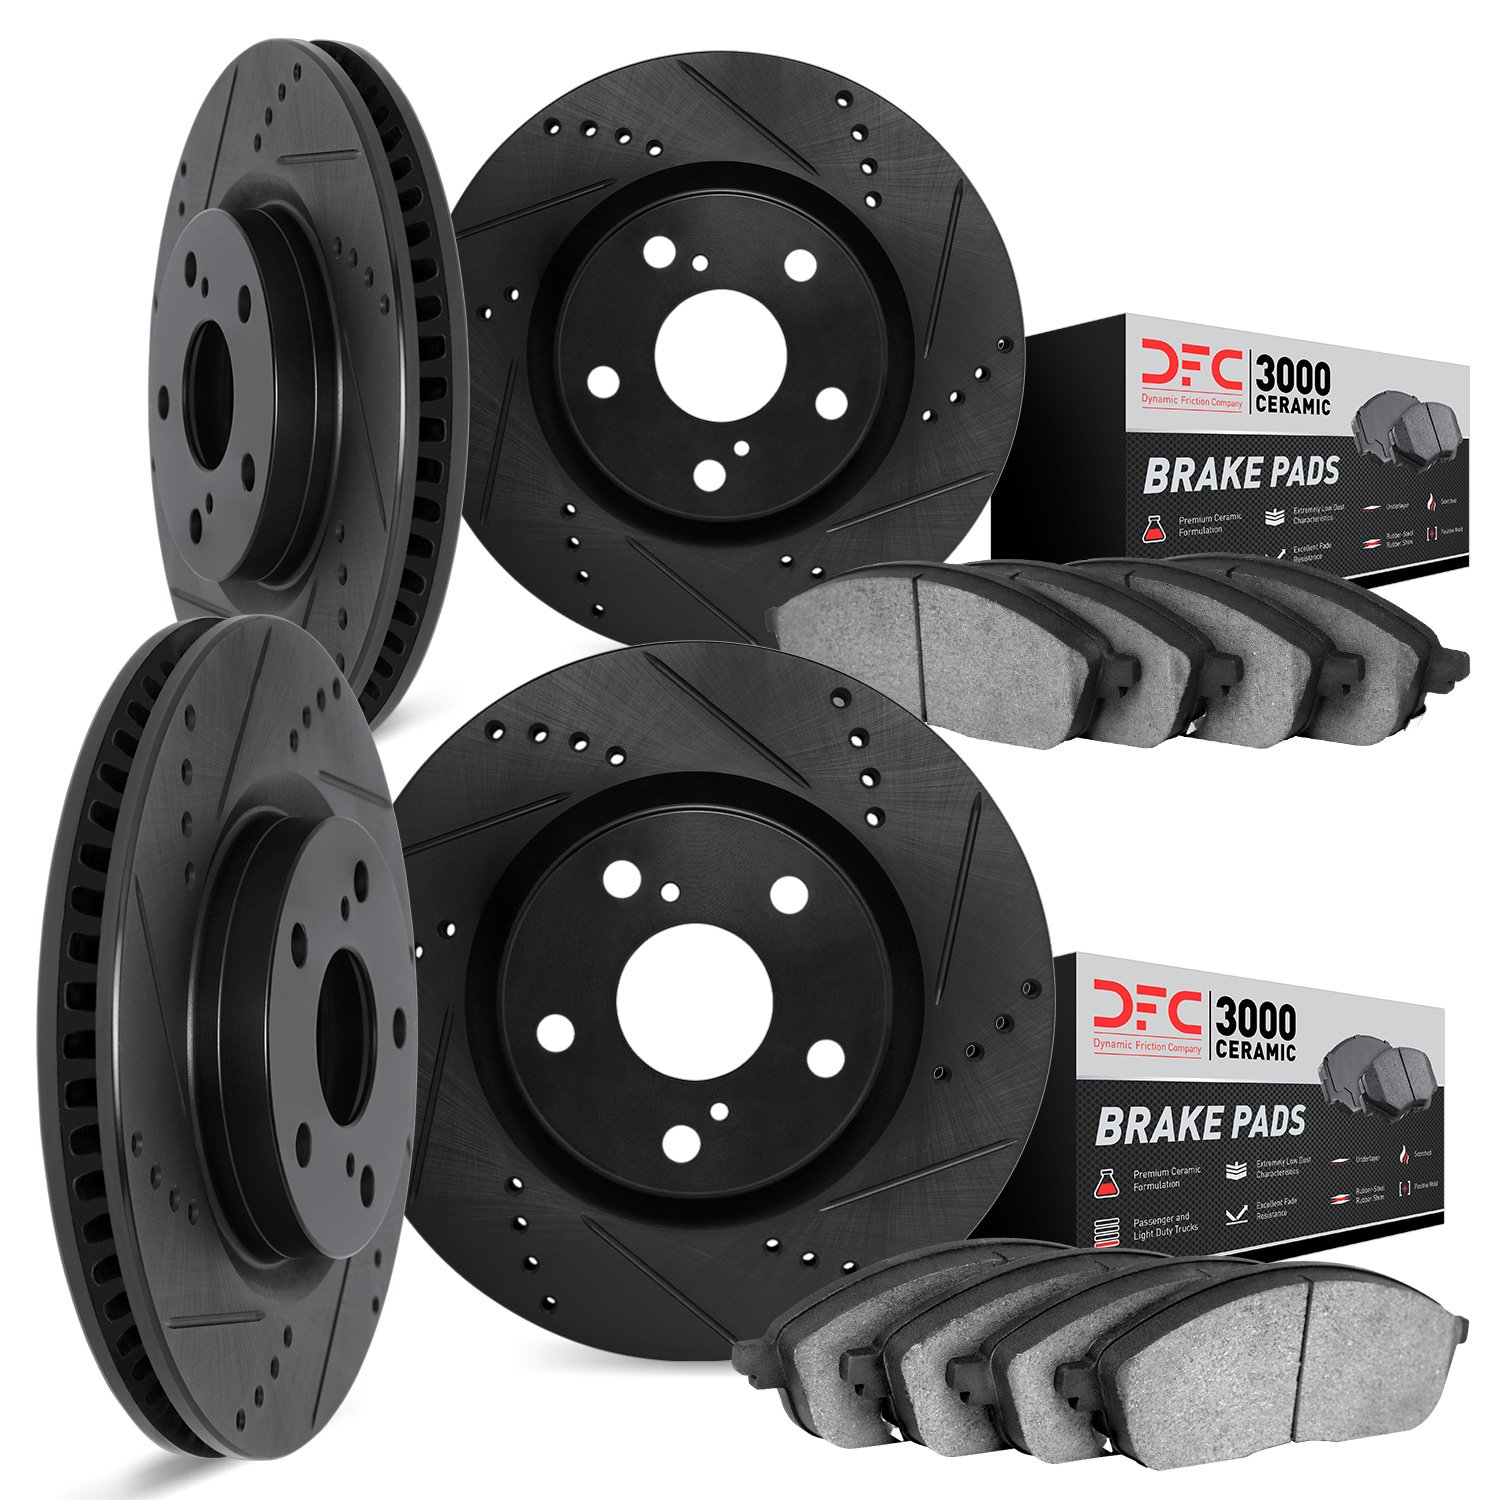 8304-47016 Drilled/Slotted Brake Rotors with 3000-Series Ceramic Brake Pads Kit [Black], 1993-1993 GM, Position: Front and Rear